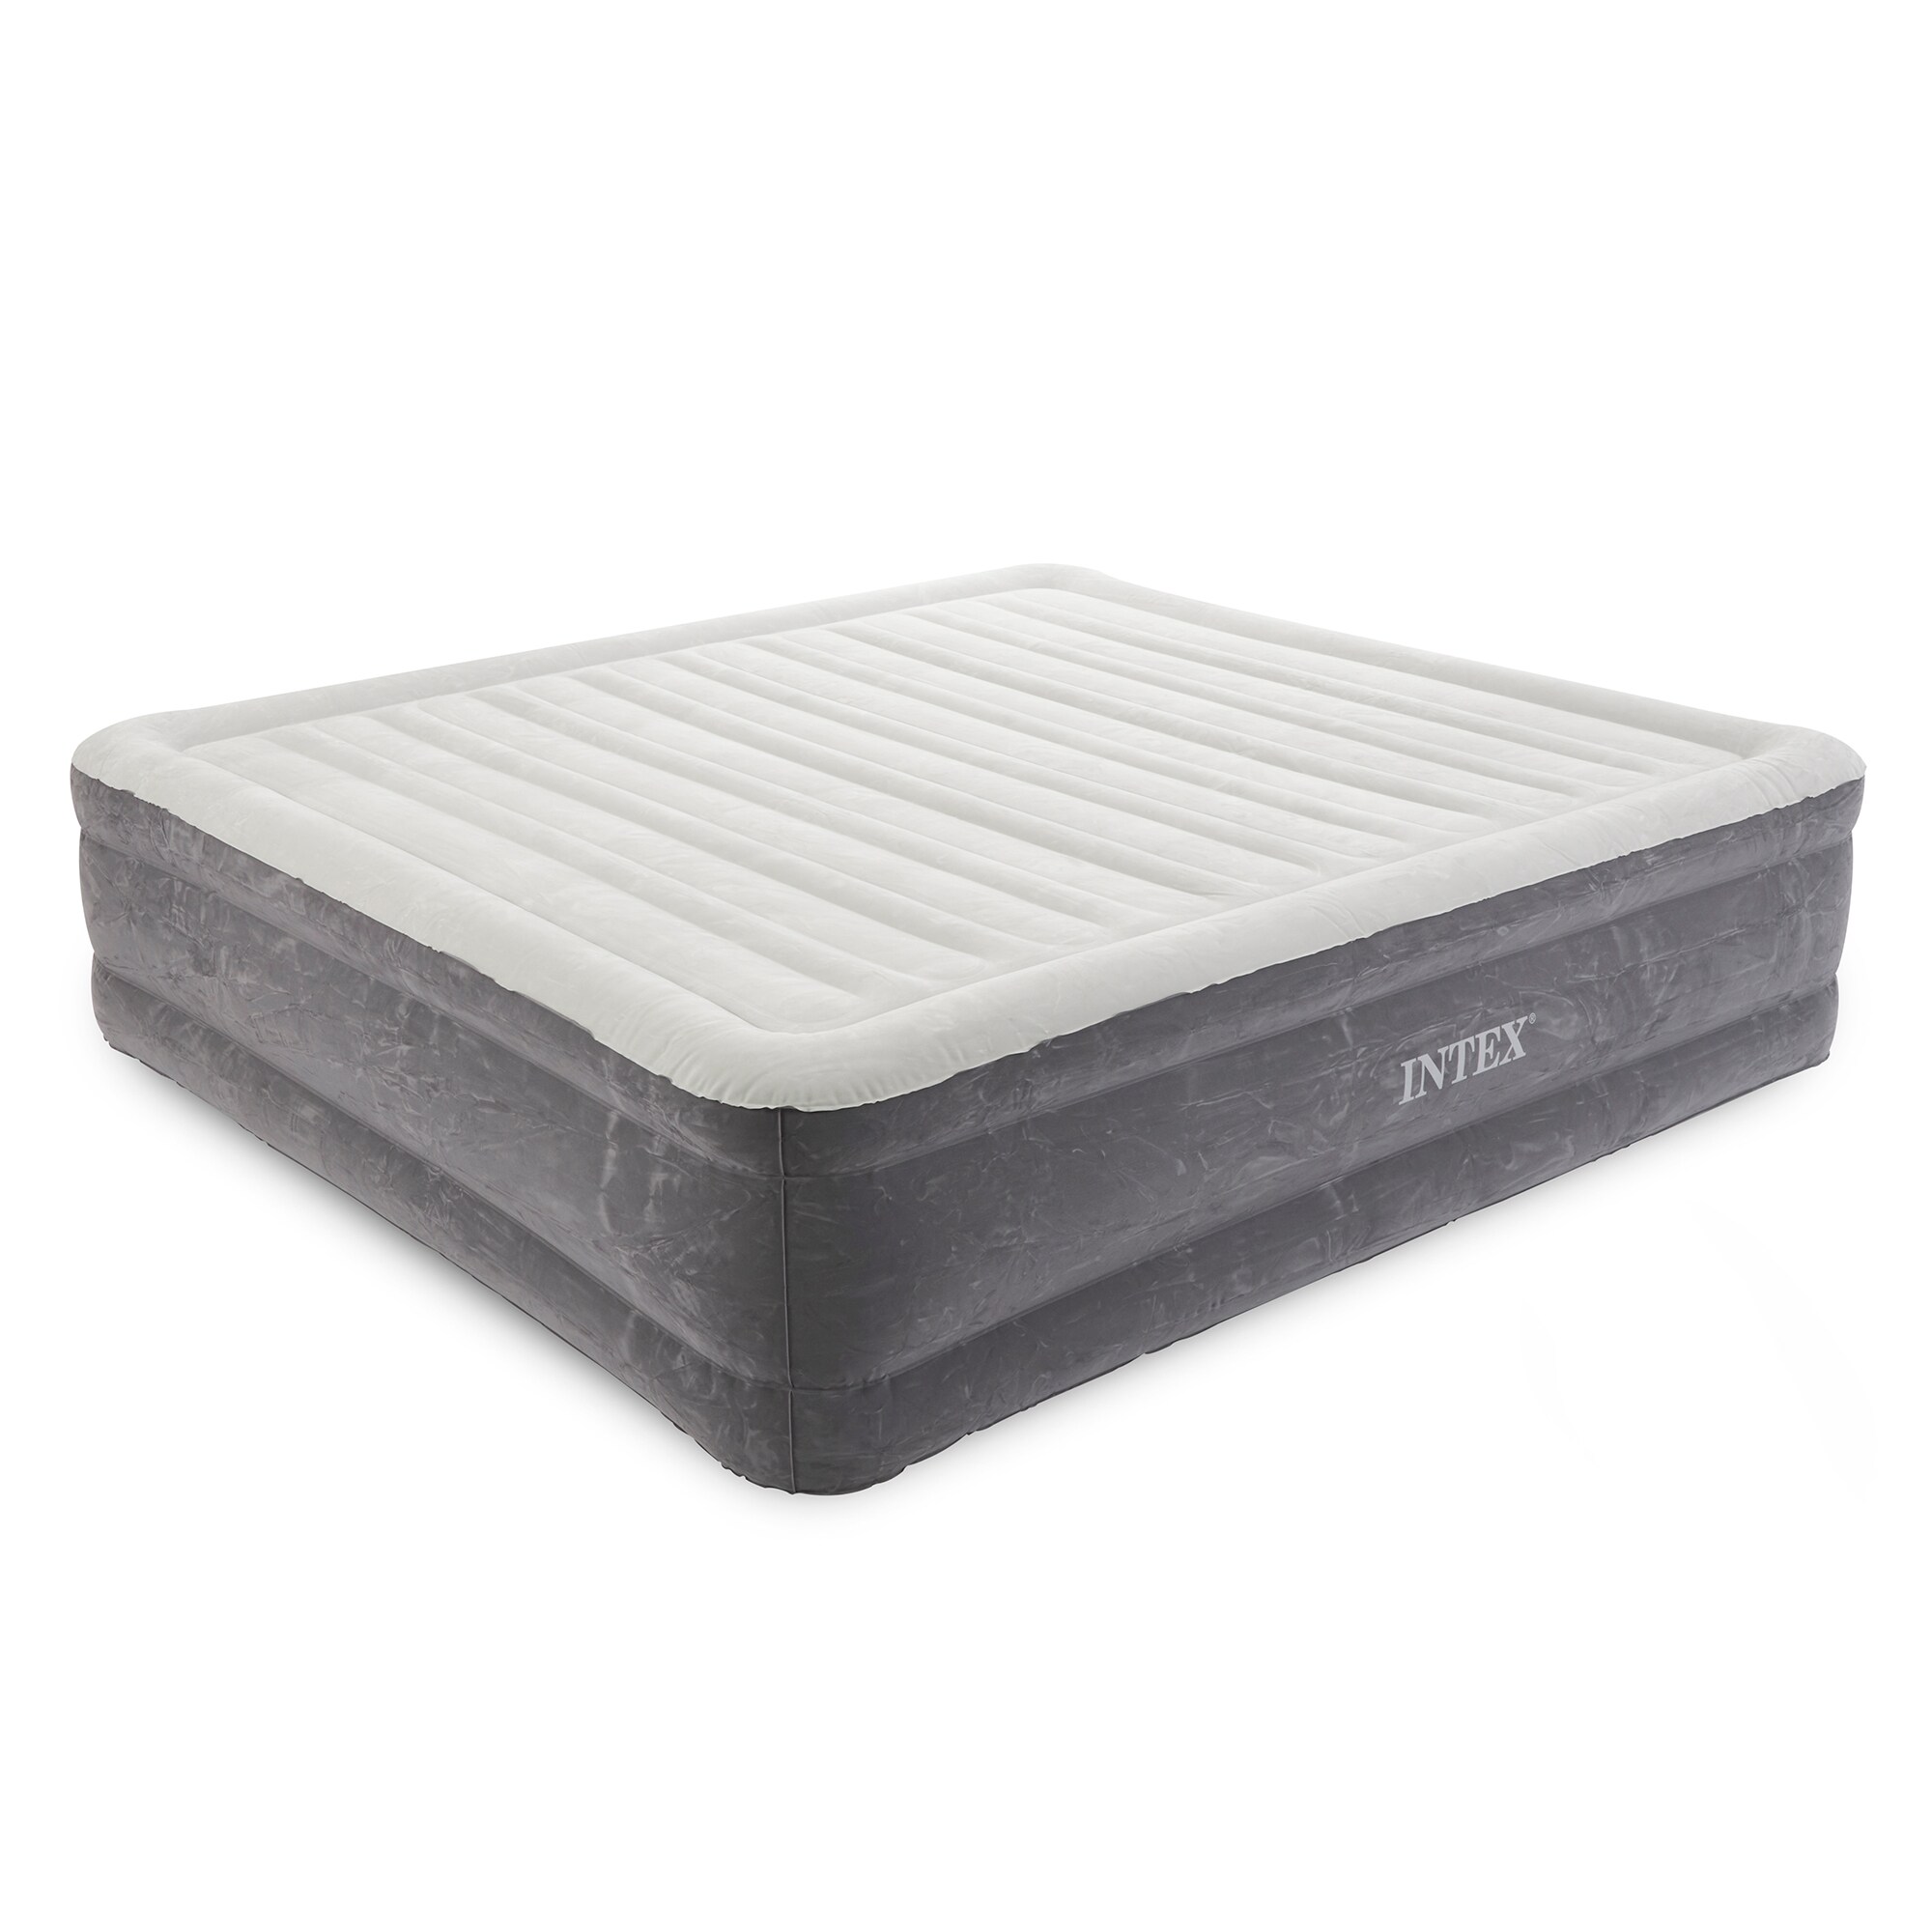 Intex King Size Double High Air Mattress with Built-in Pump, Dura-Beam  Technology, Waterproof, Multiple Colors/Finishes in the Air Mattresses  department at